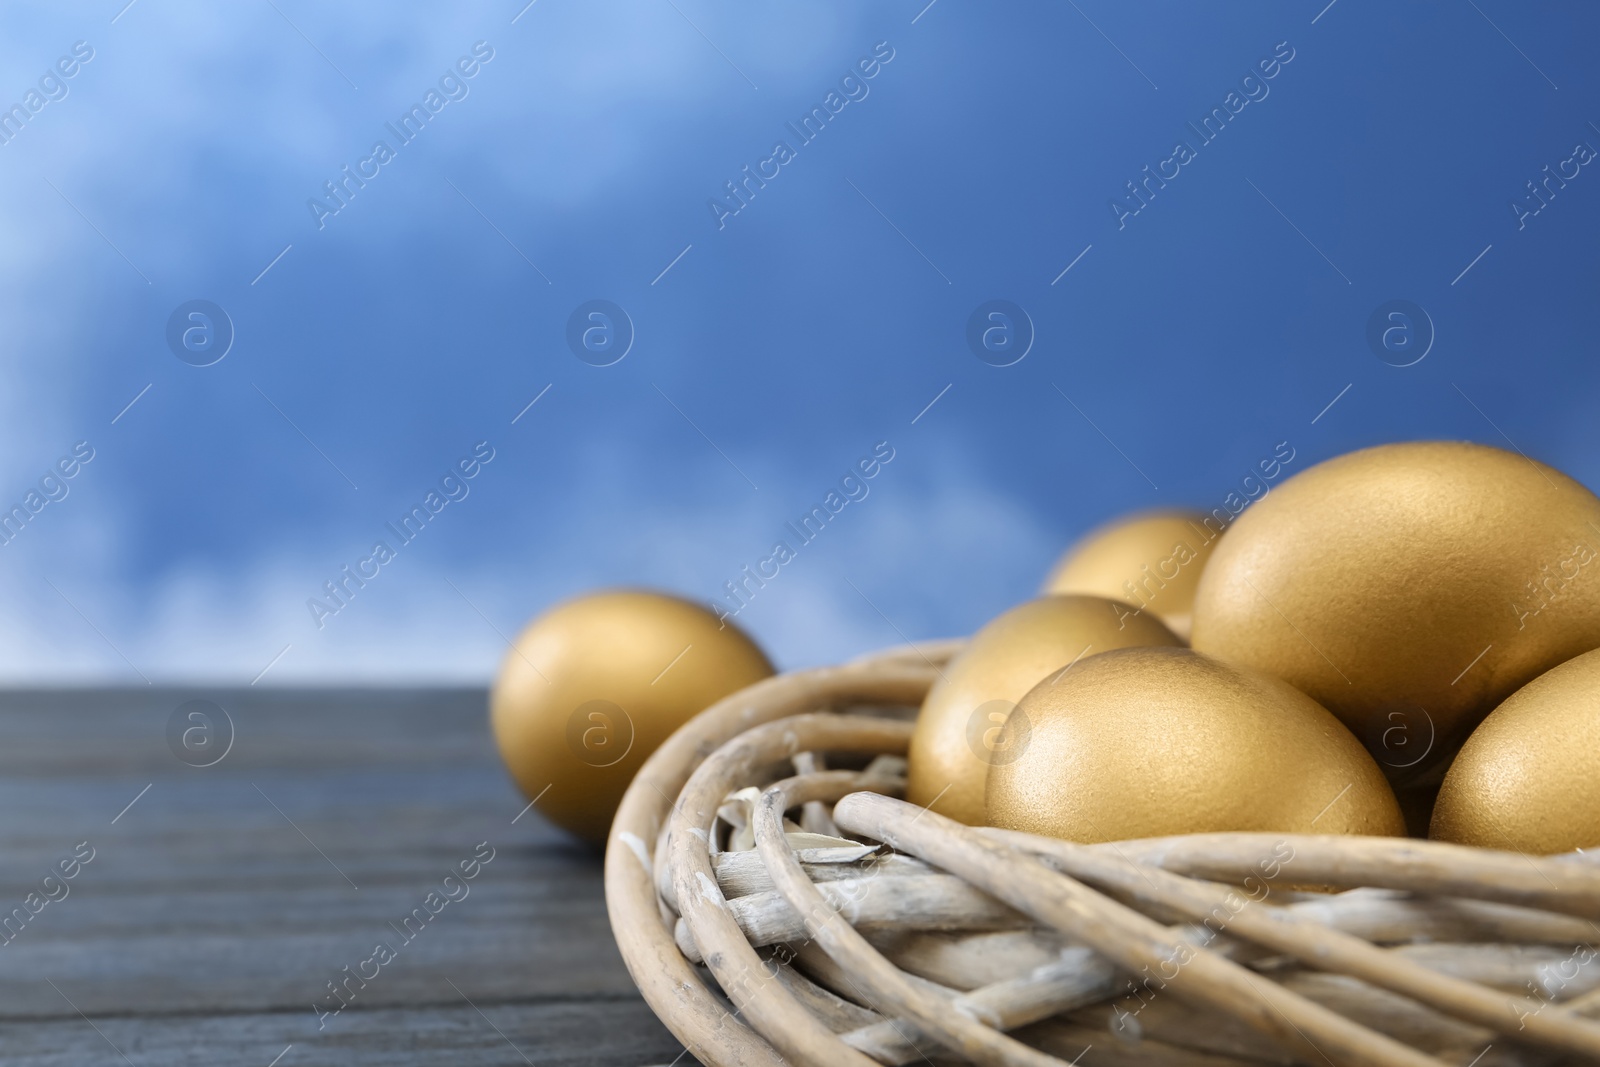 Photo of Golden eggs in nest on wooden table against color background, space for text